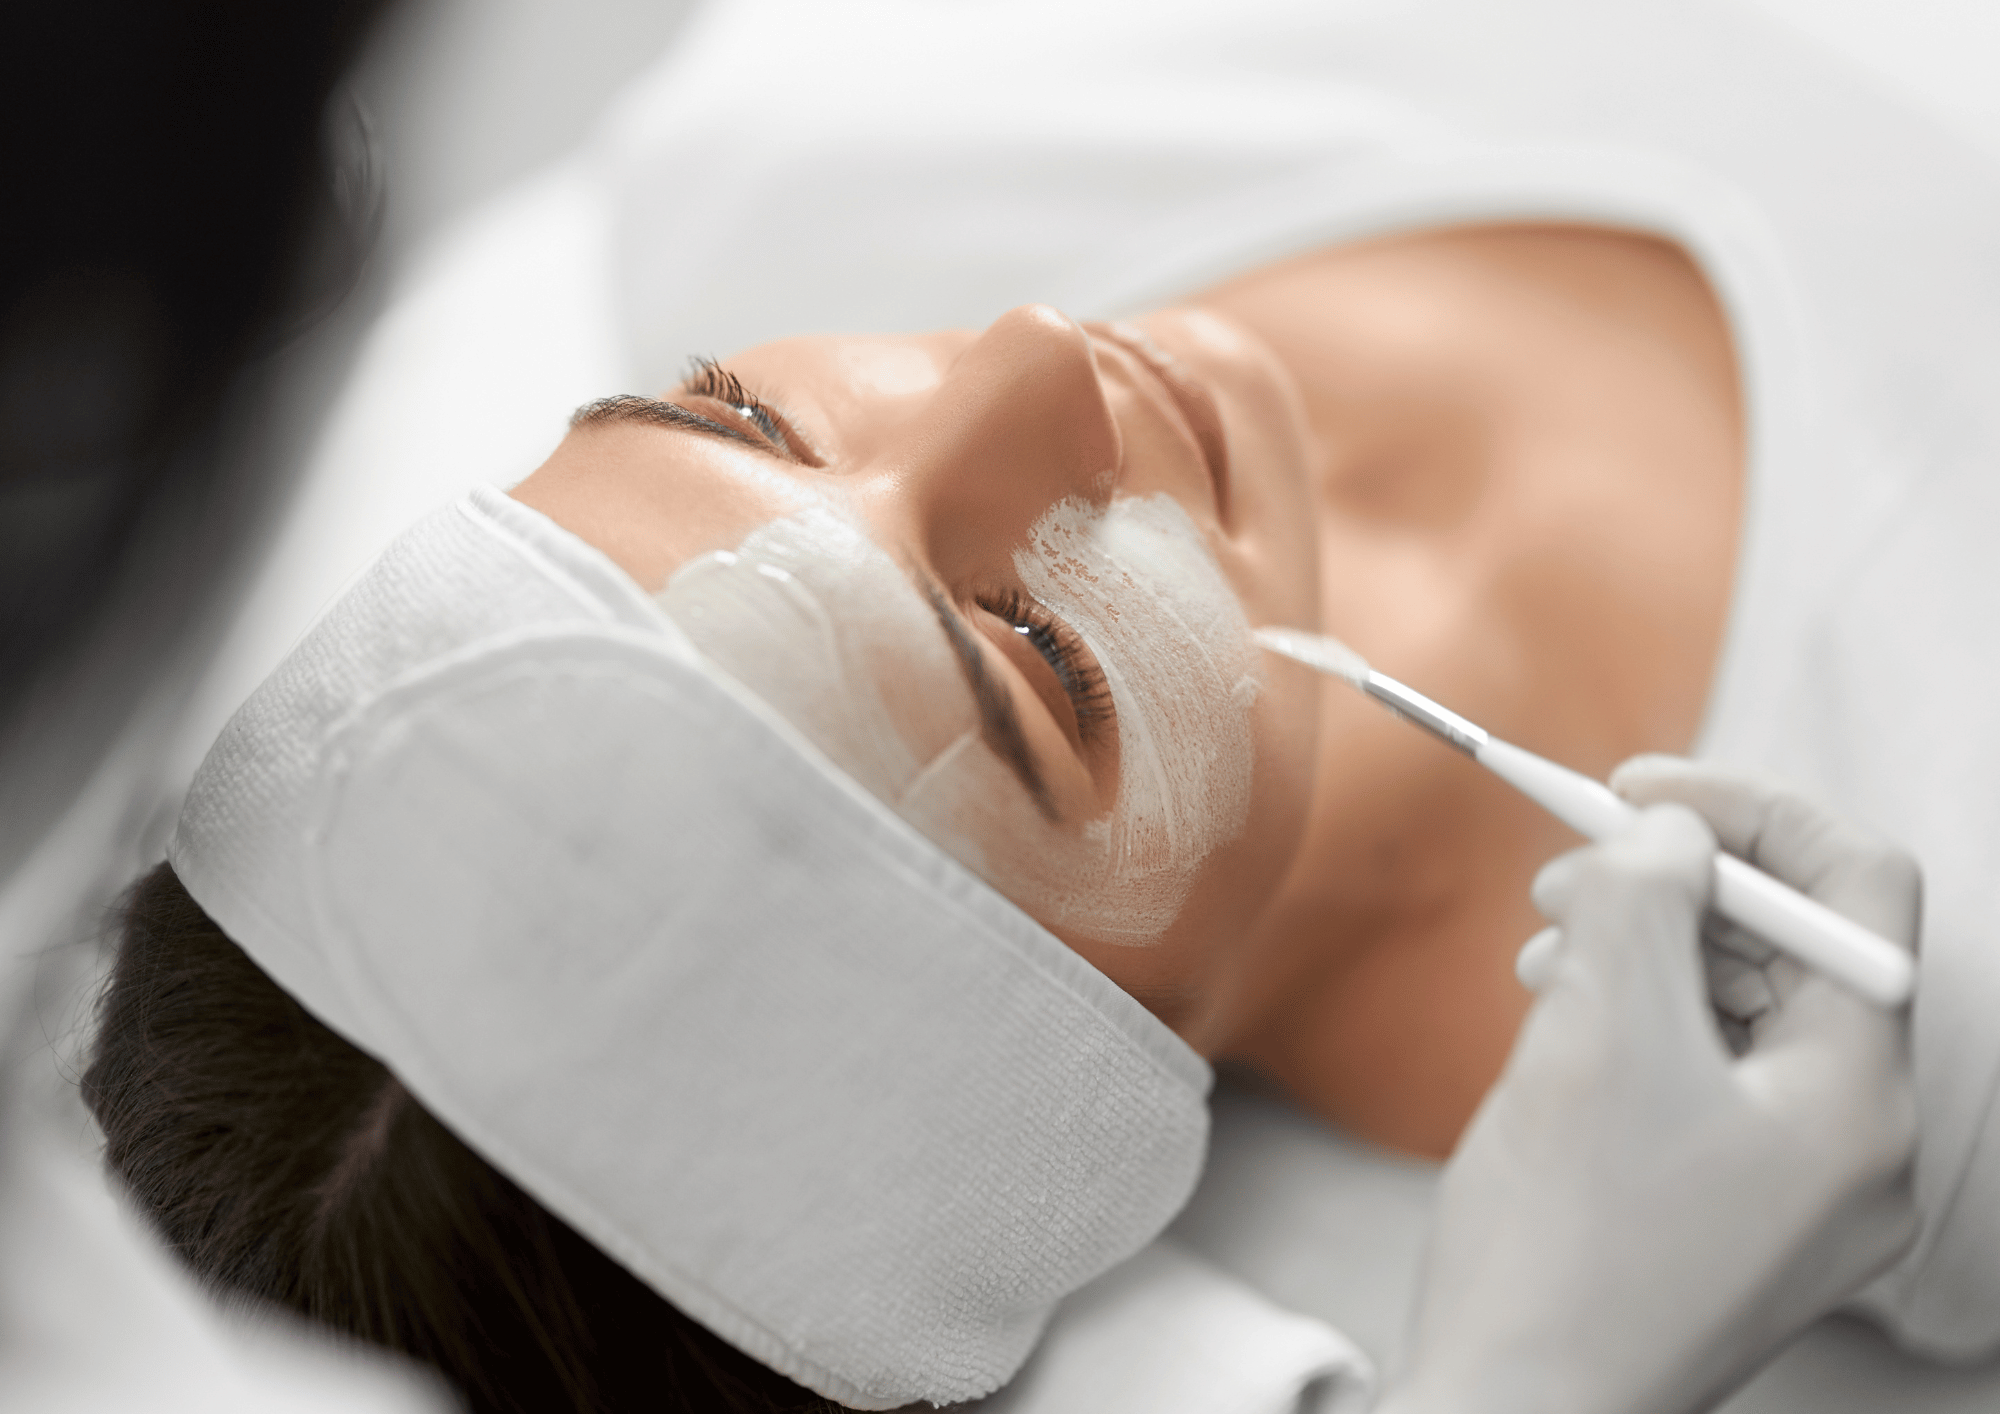 Chemical peels: A revolution in skin care